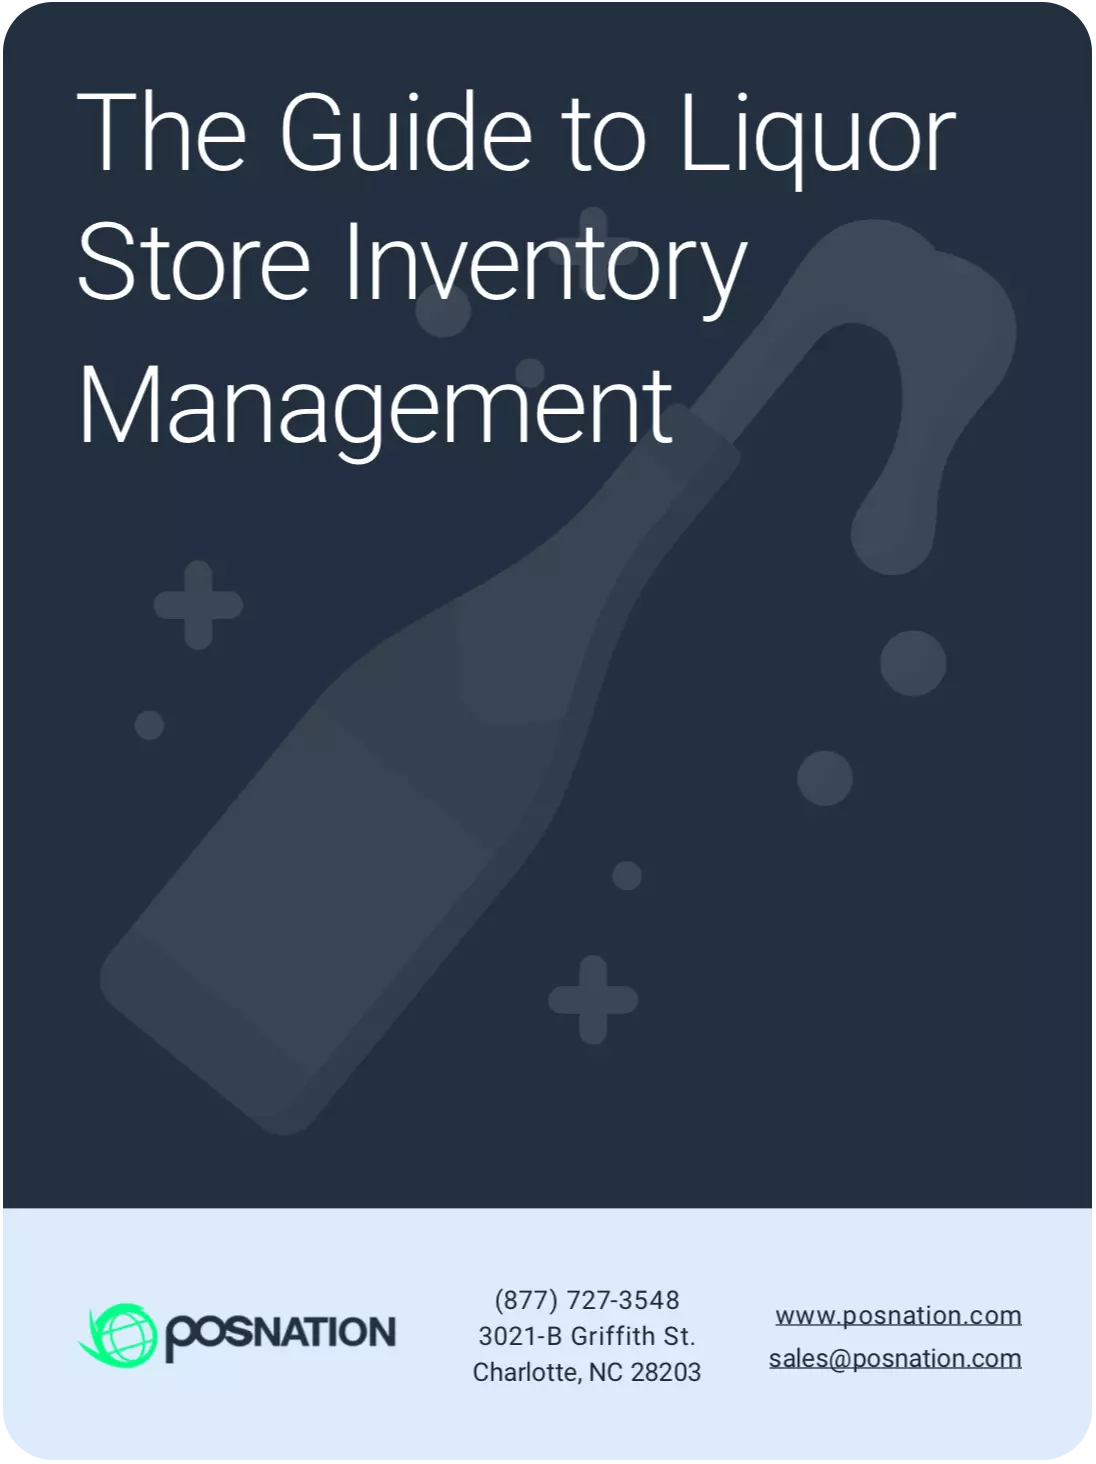 The Guide to Liquor Store Inventory Management